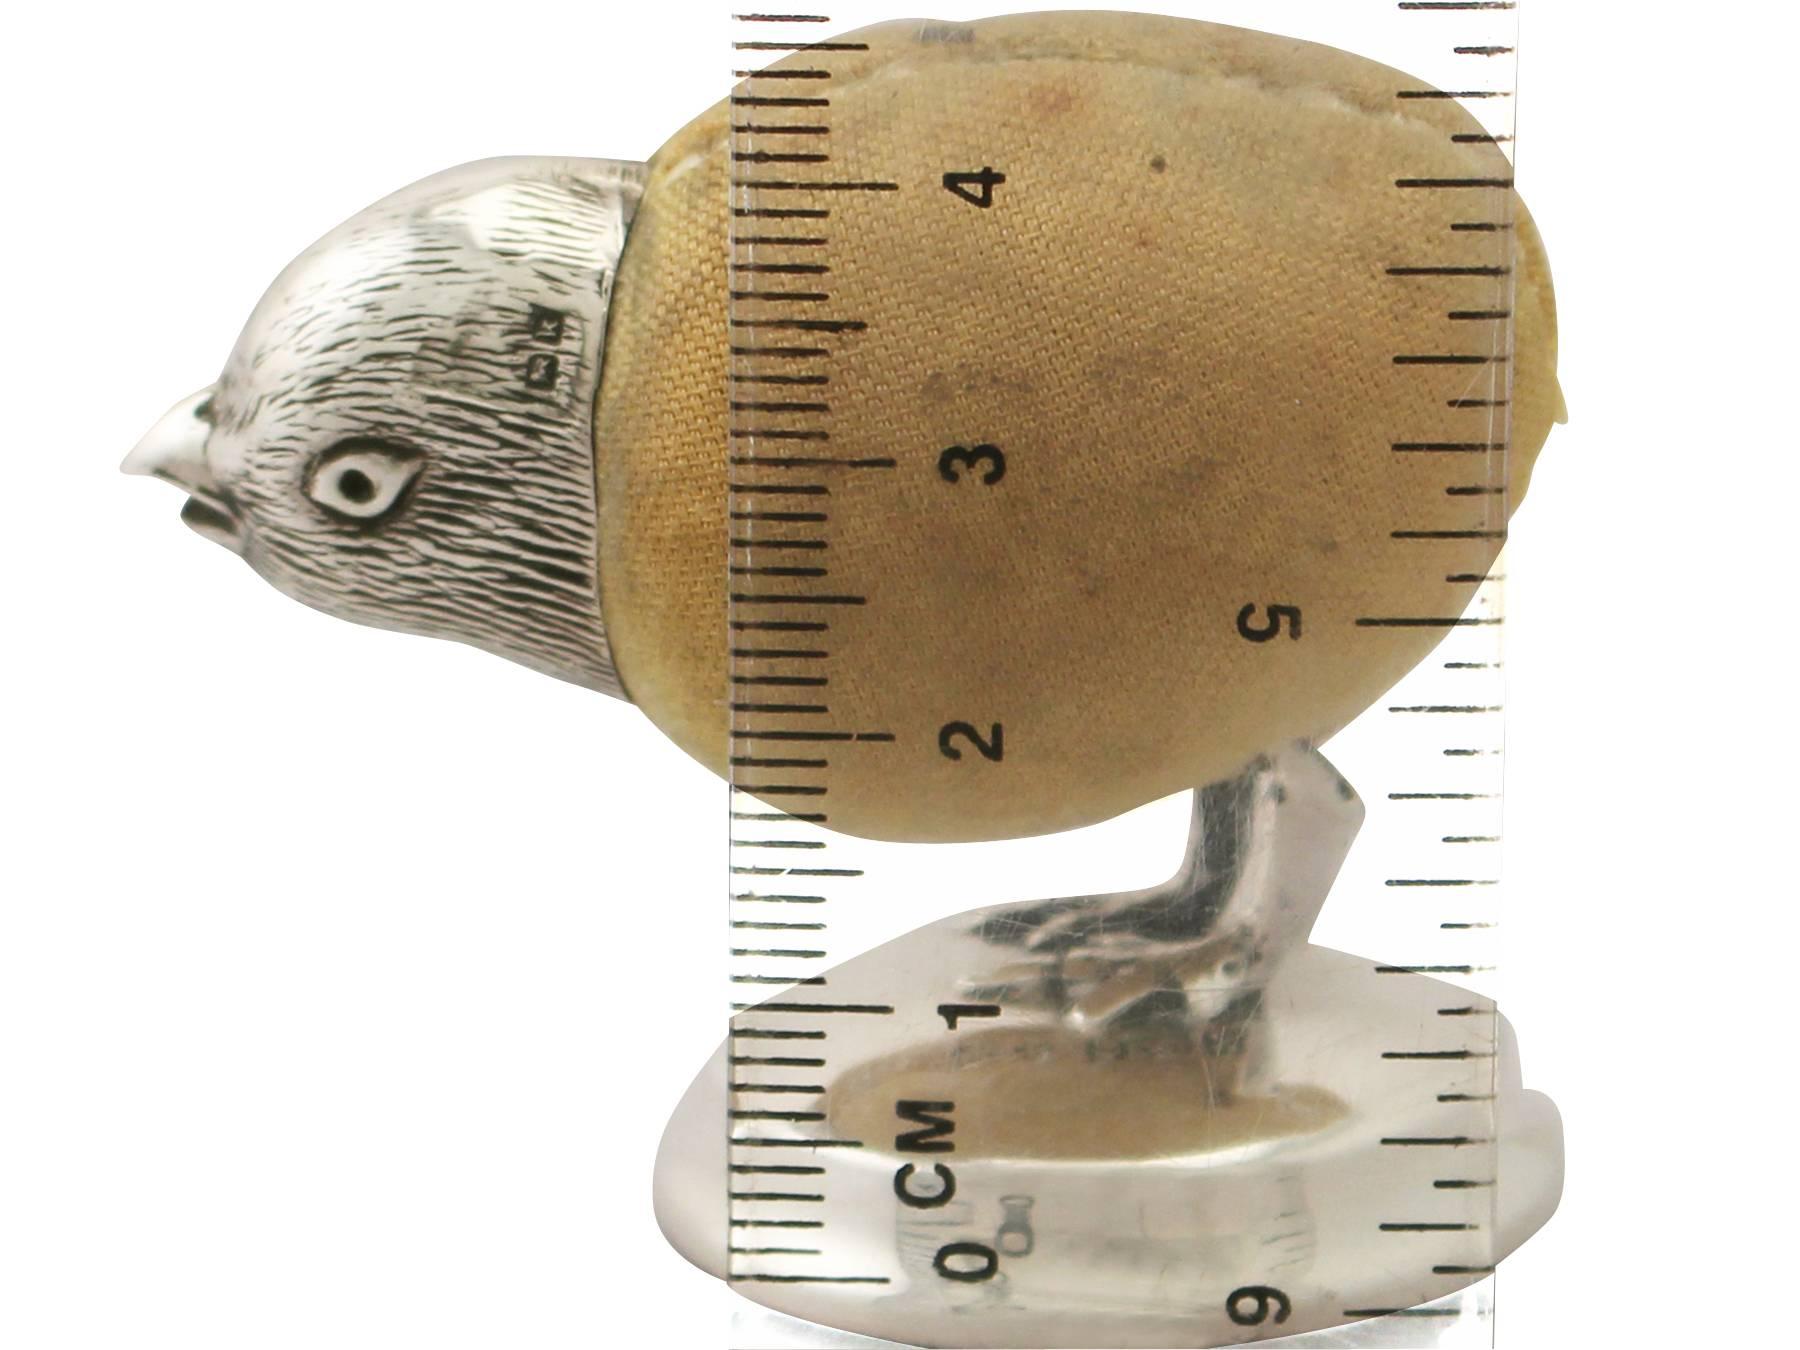 English Antique Edwardian Sterling Silver ‘Chick’ Pin Cushion